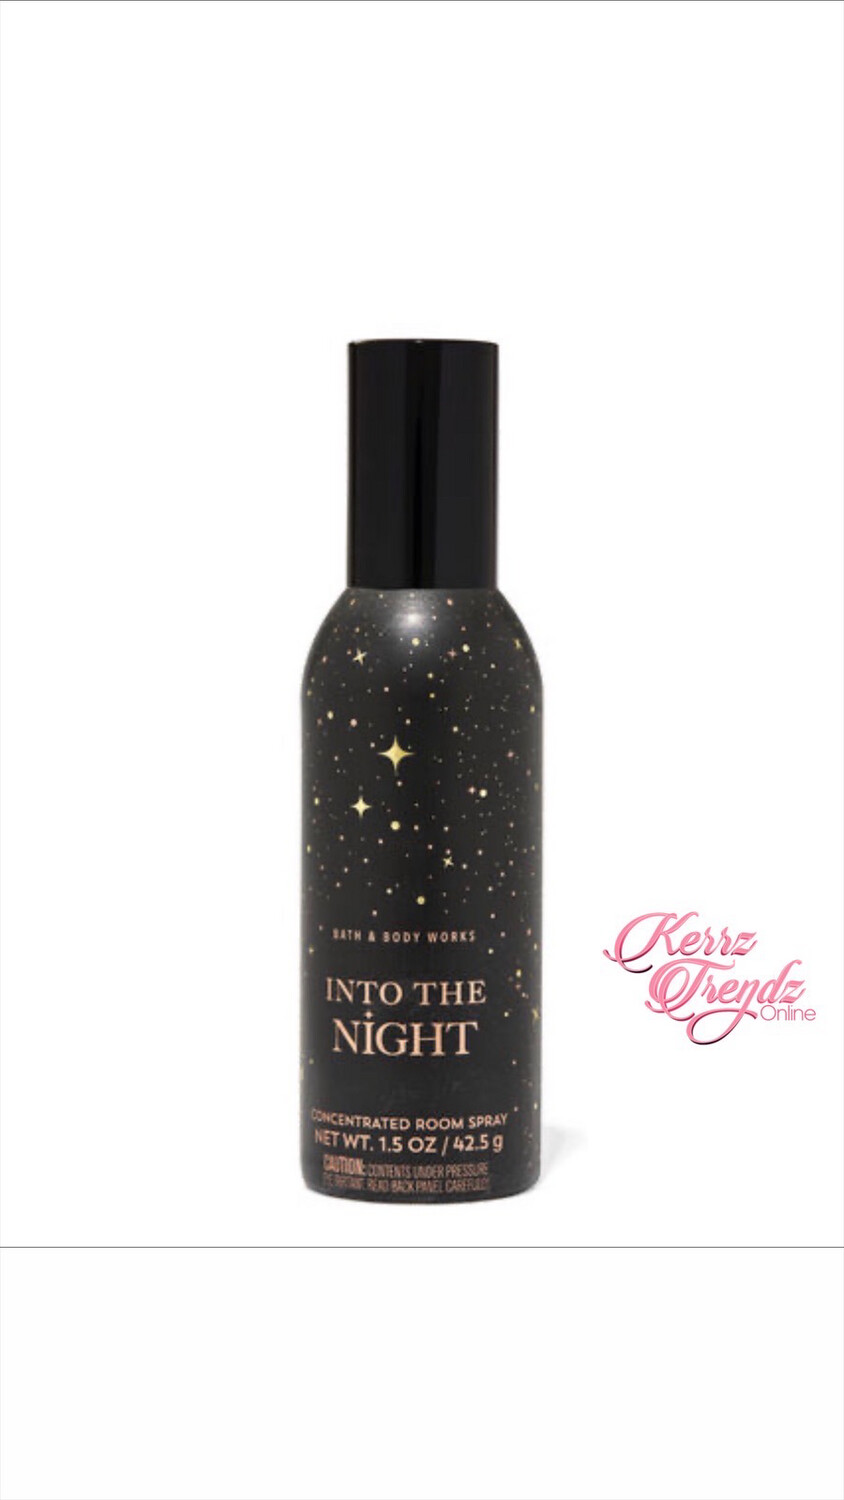 Into The Night Concentrated Room Spray